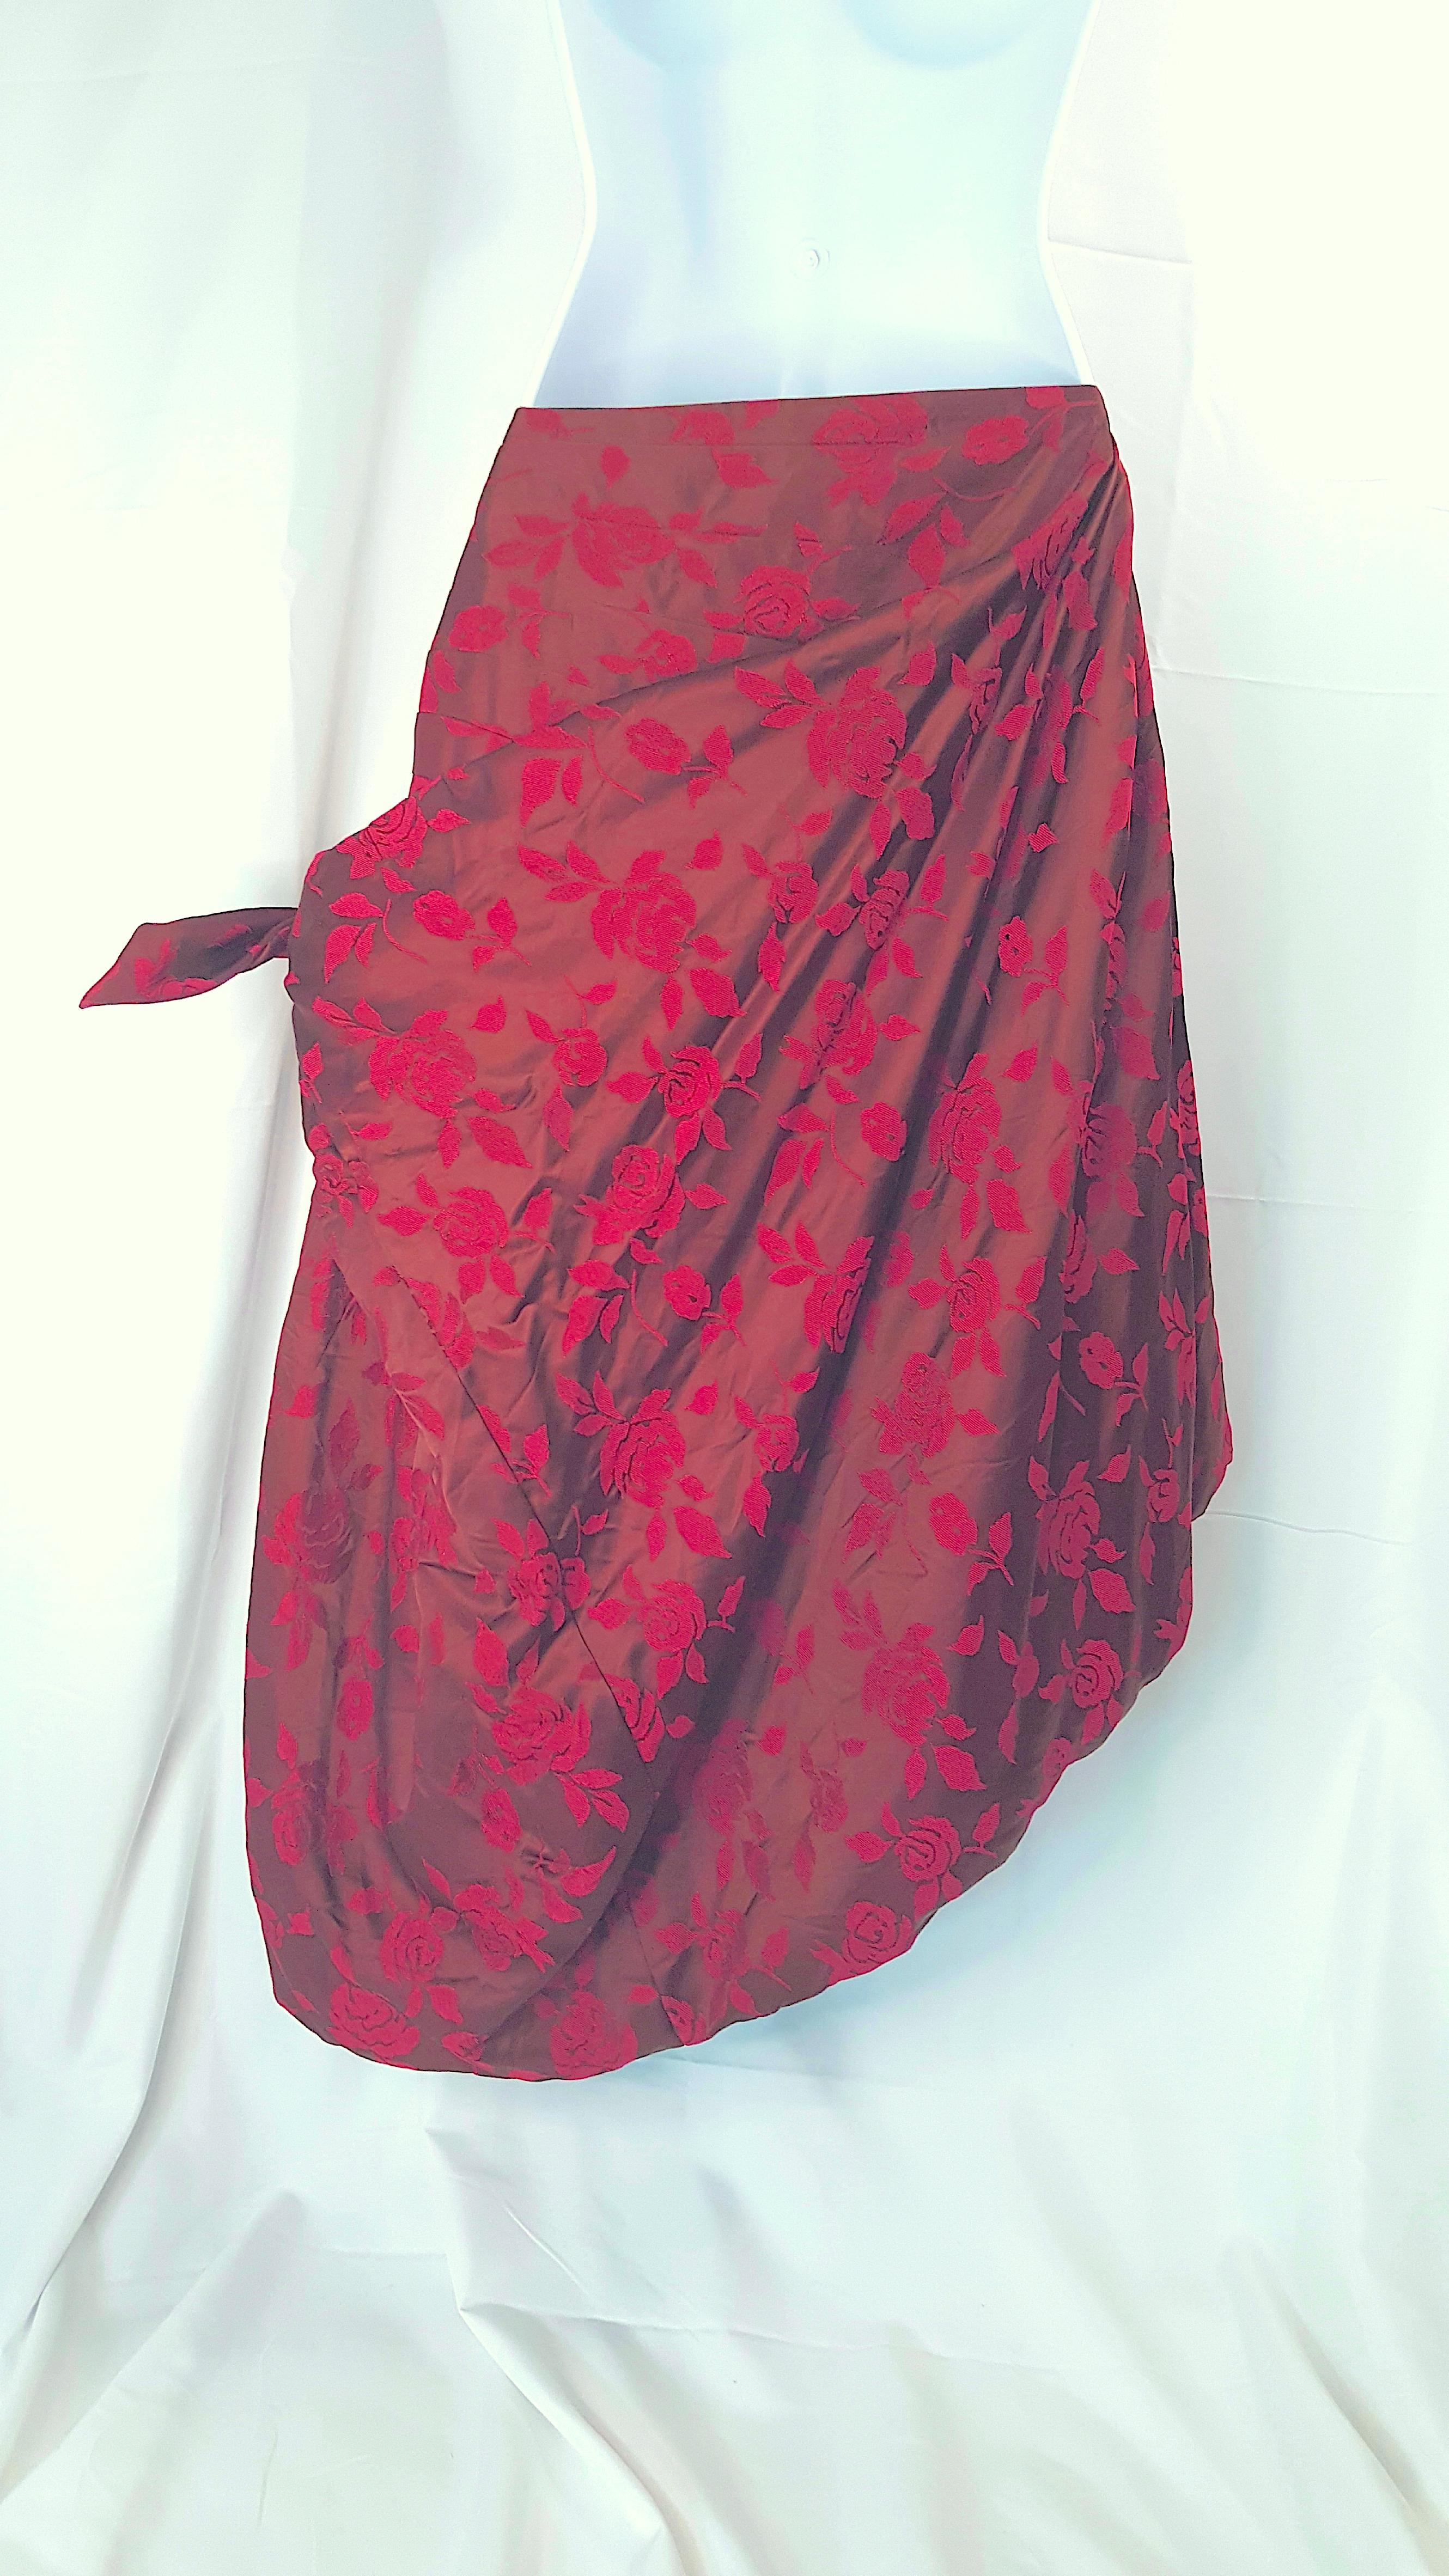 CommeDesGarcons 1996 Convertible Padded RedRoseJacquard & NavyCotton Skirt Cape For Sale 1